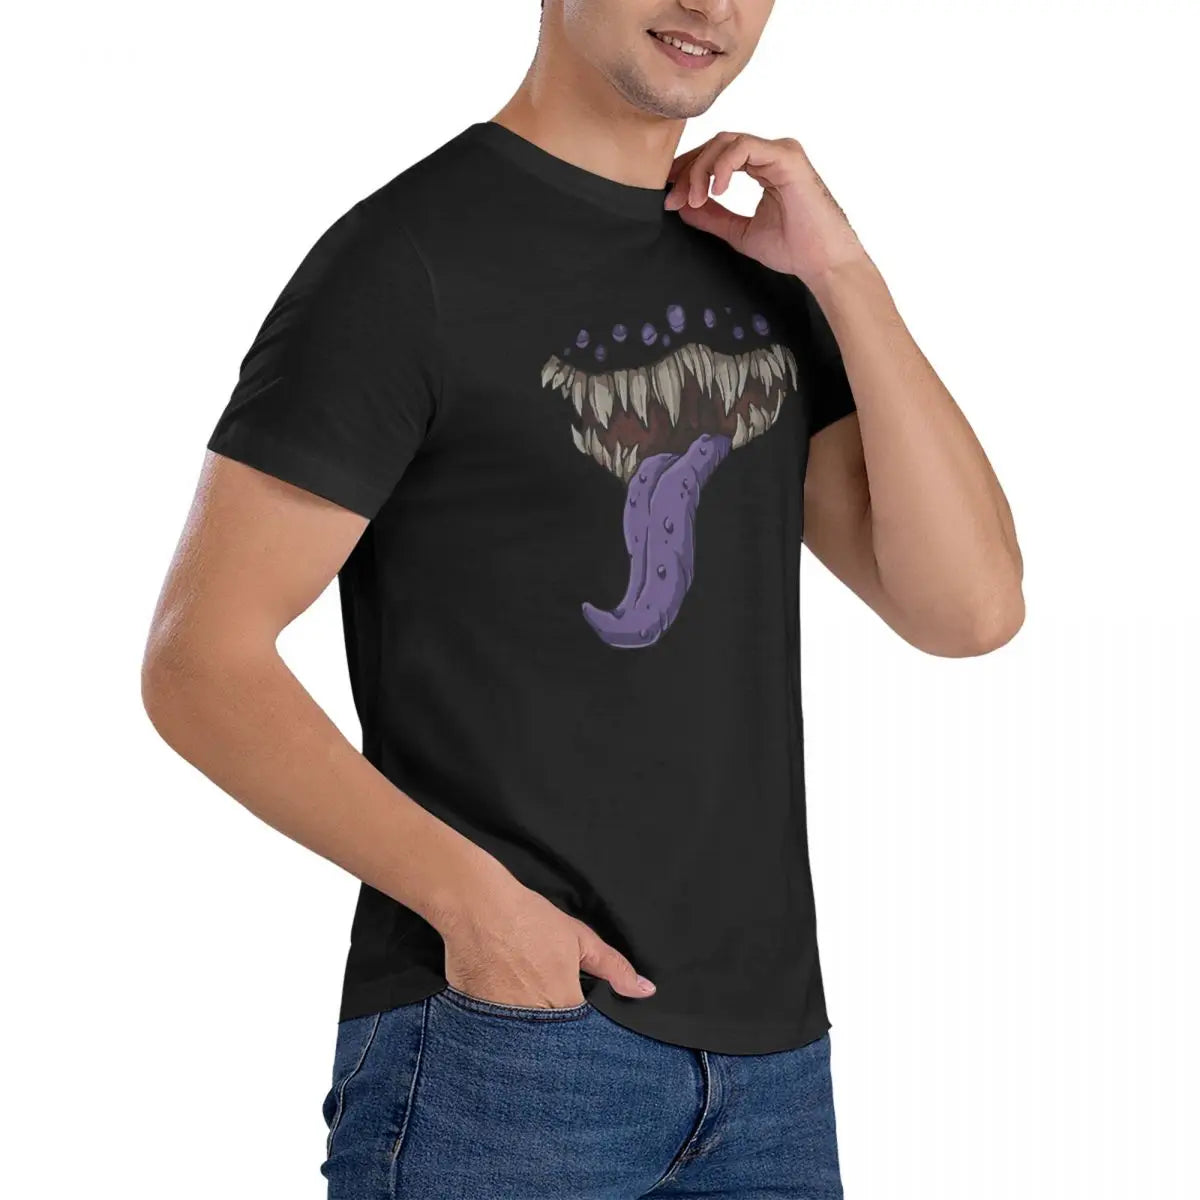 Men's Mimic Mouth Print T Shirt D-Dungeons And Dragons DND 100% Cotton Clothing Humor Short Sleeve Crew Neck Tees New Arrival